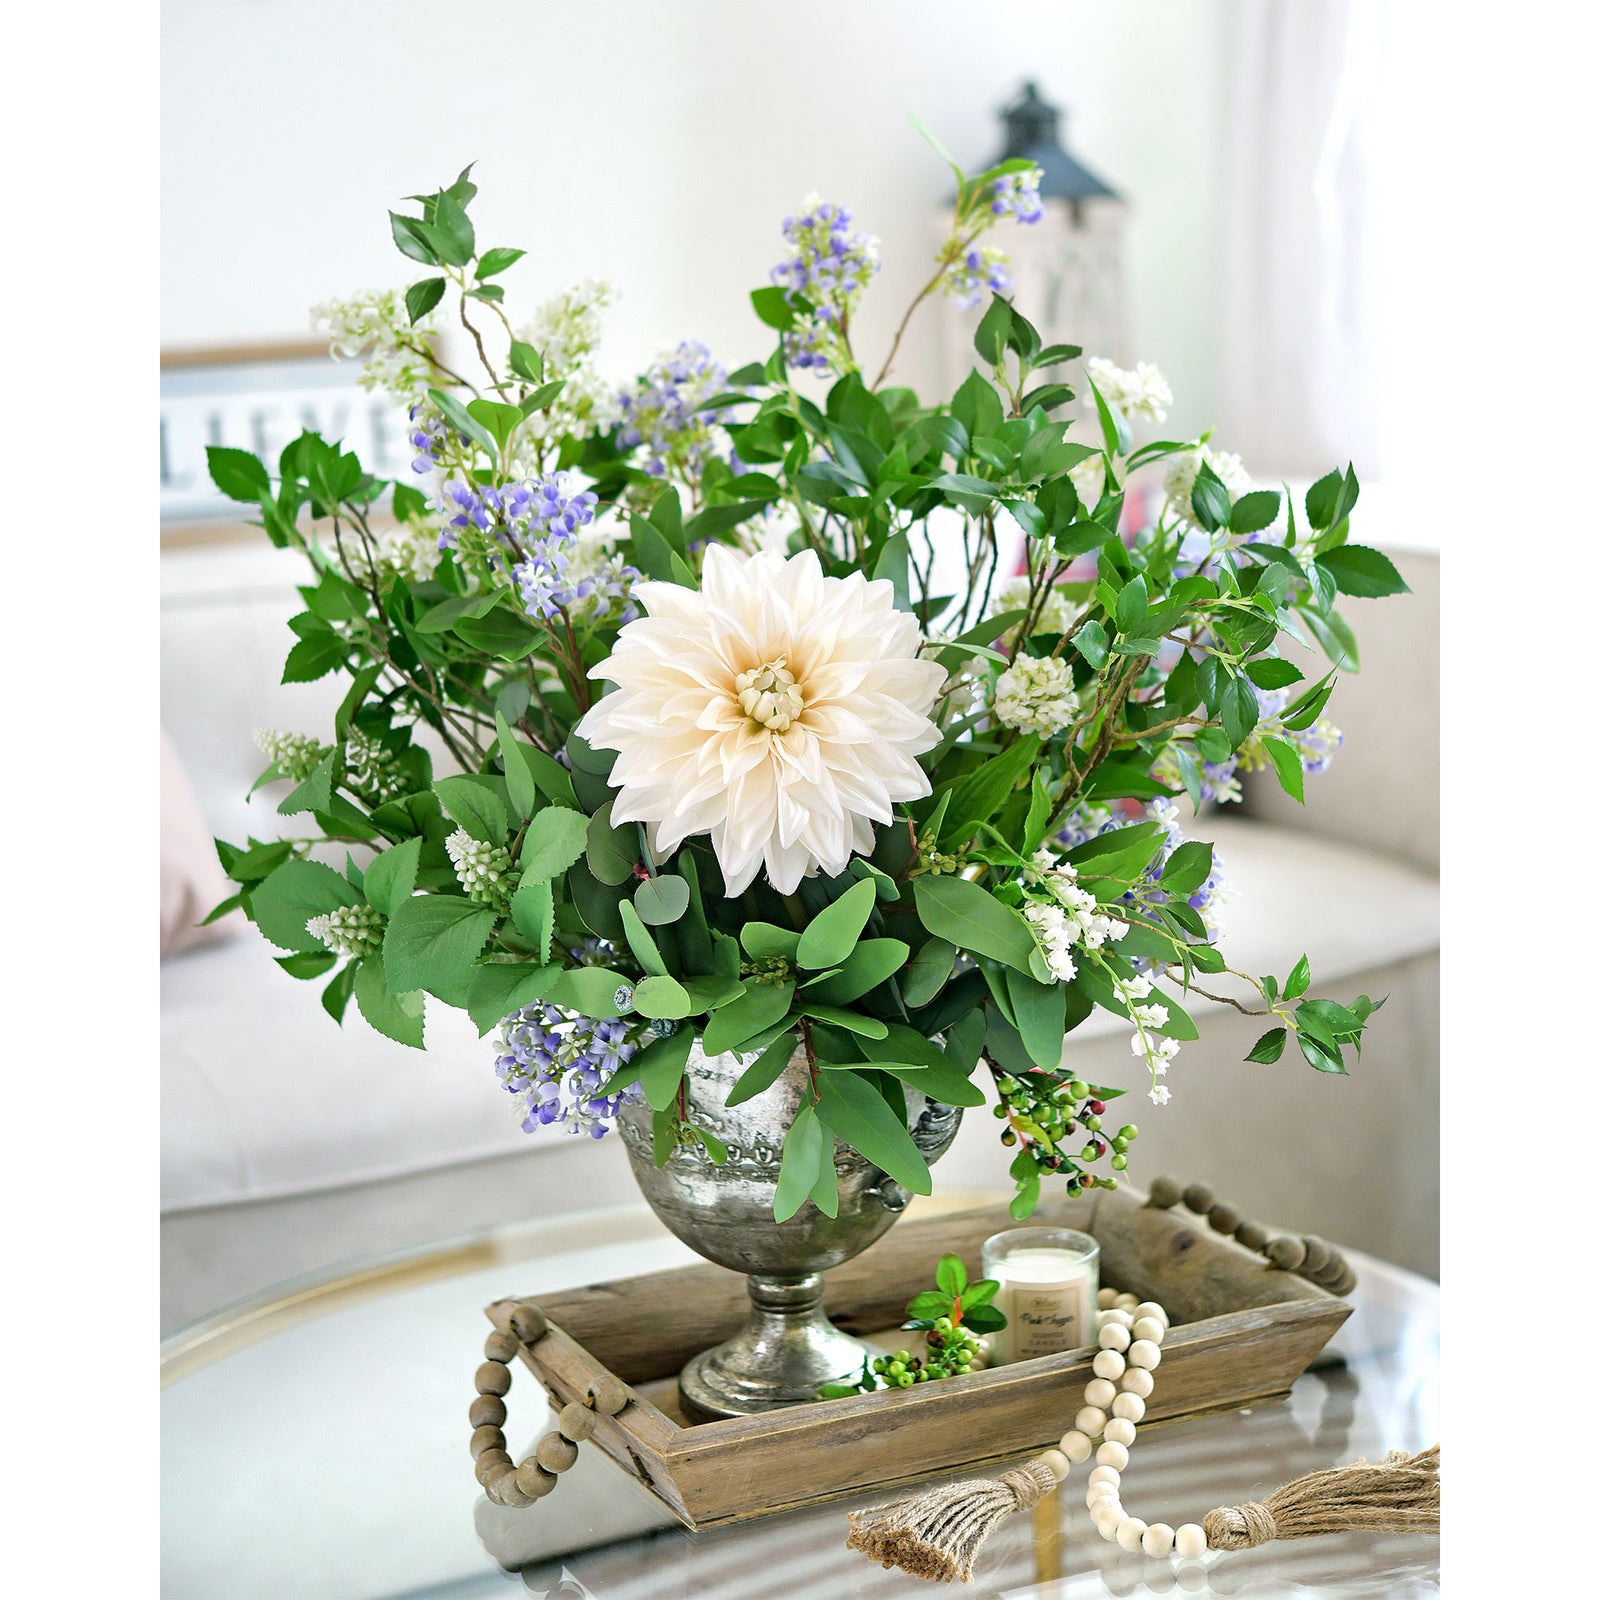 6 Bunches 25.6'' 65cm Real Touch Cherry Blossom Leaves and Branches Artificial Greenery Fillers